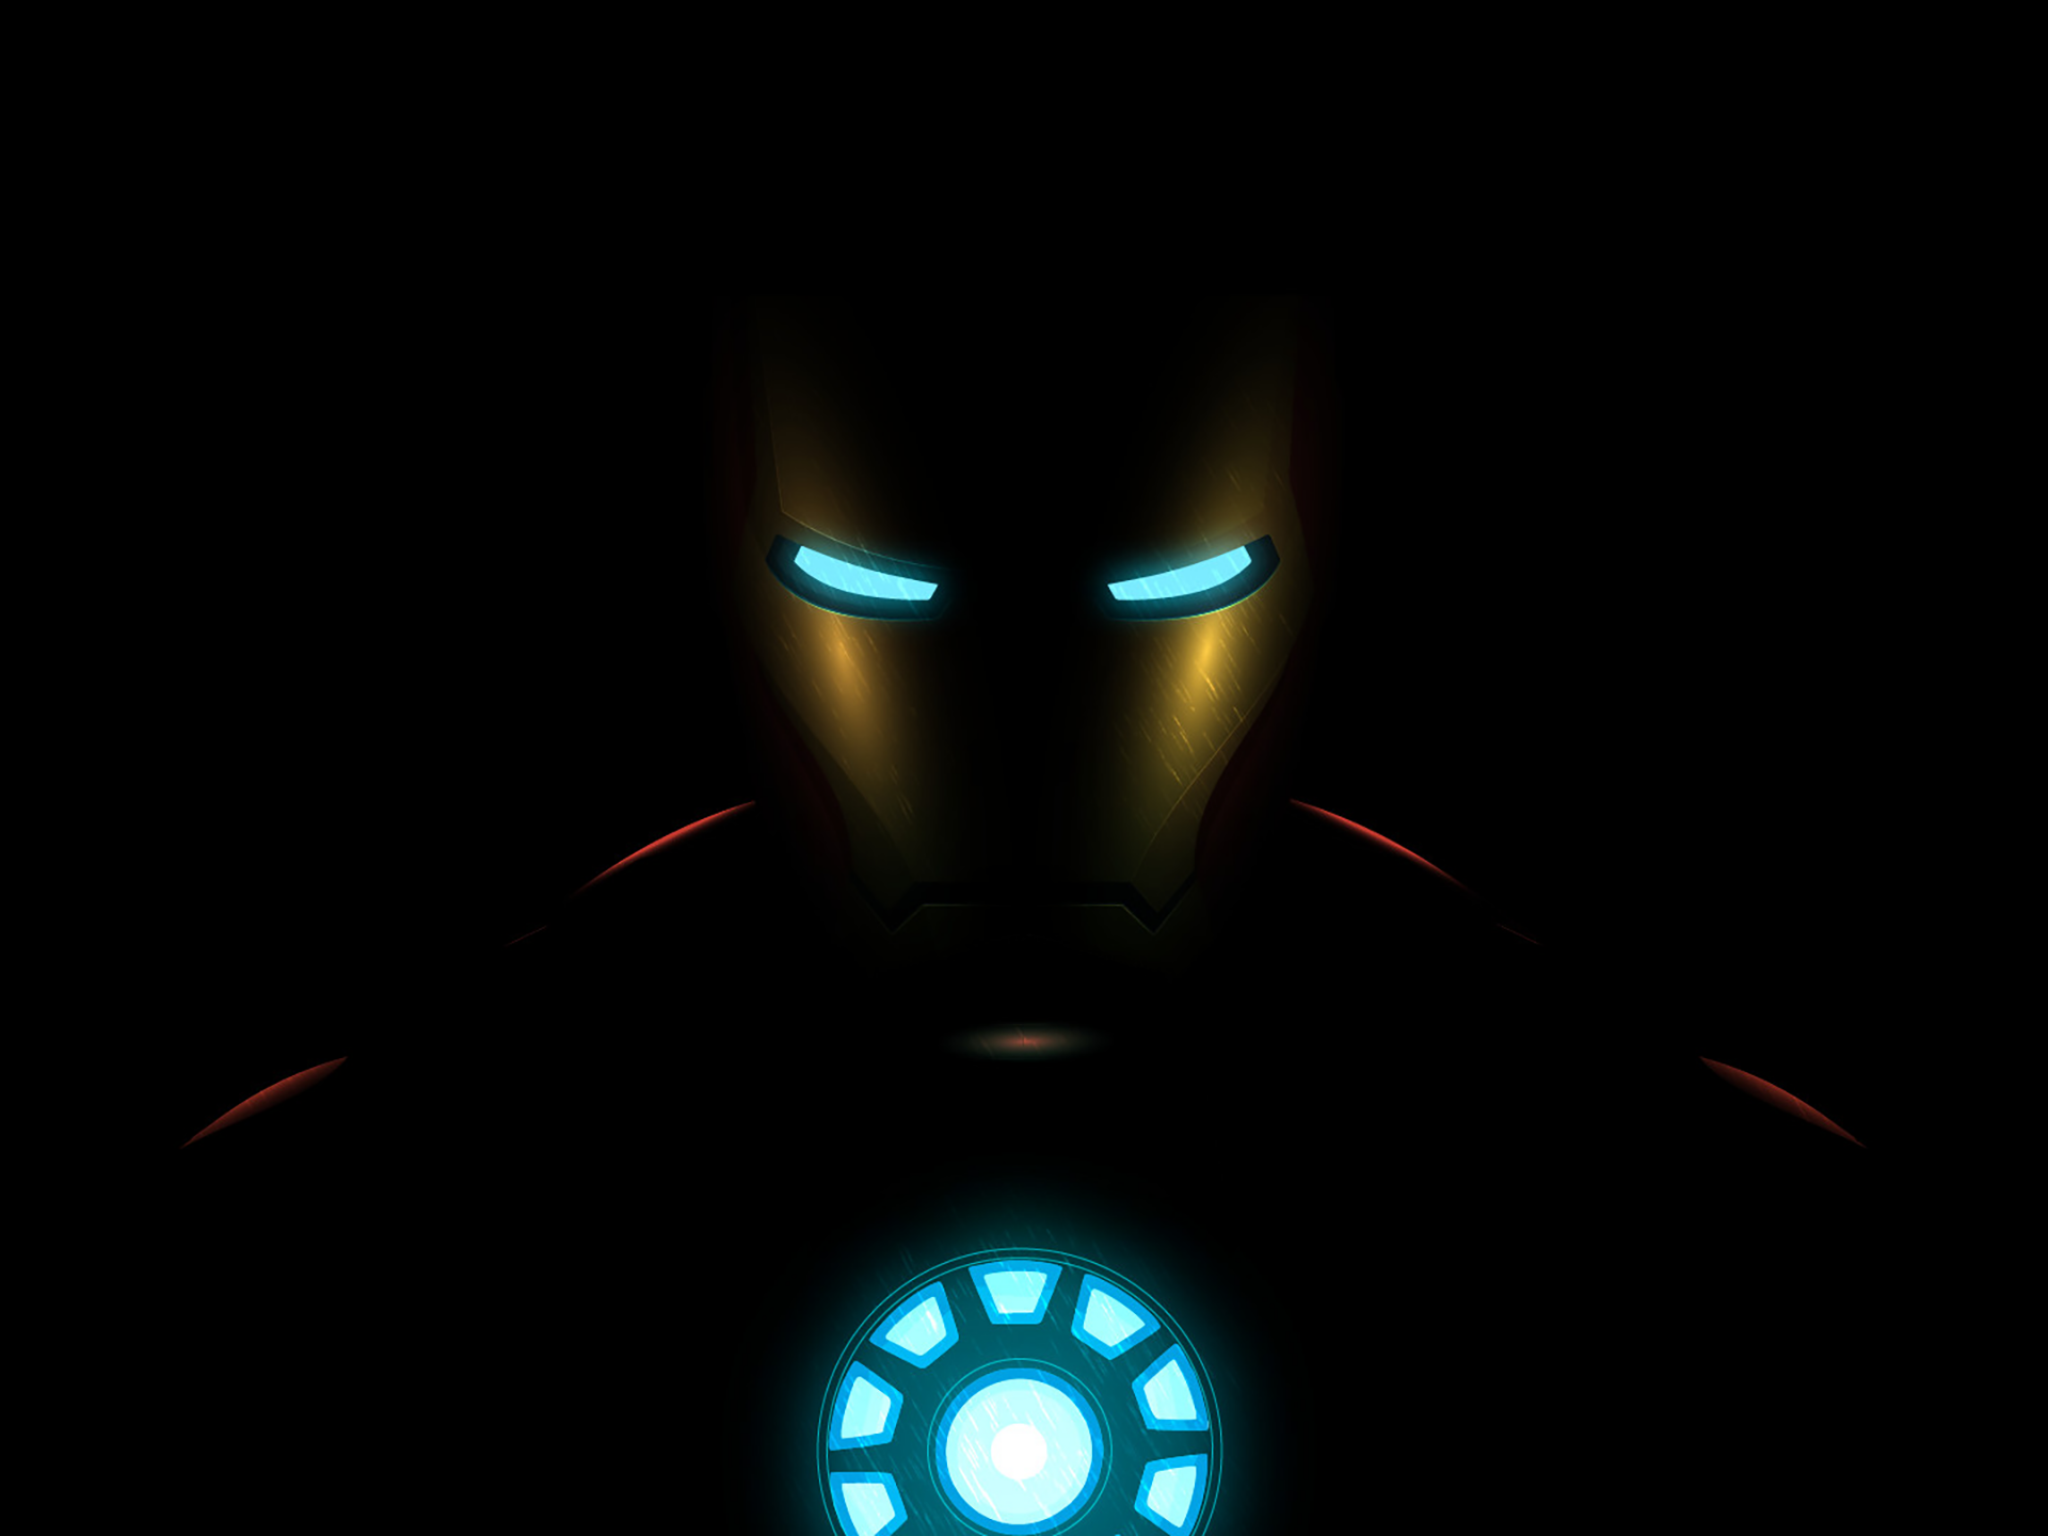 Wallpaper Iron Man, Artwork, Minimal, Dark background, HD, Creative Graphics,. Wallpaper for iPhone, Android, Mobile and Desktop